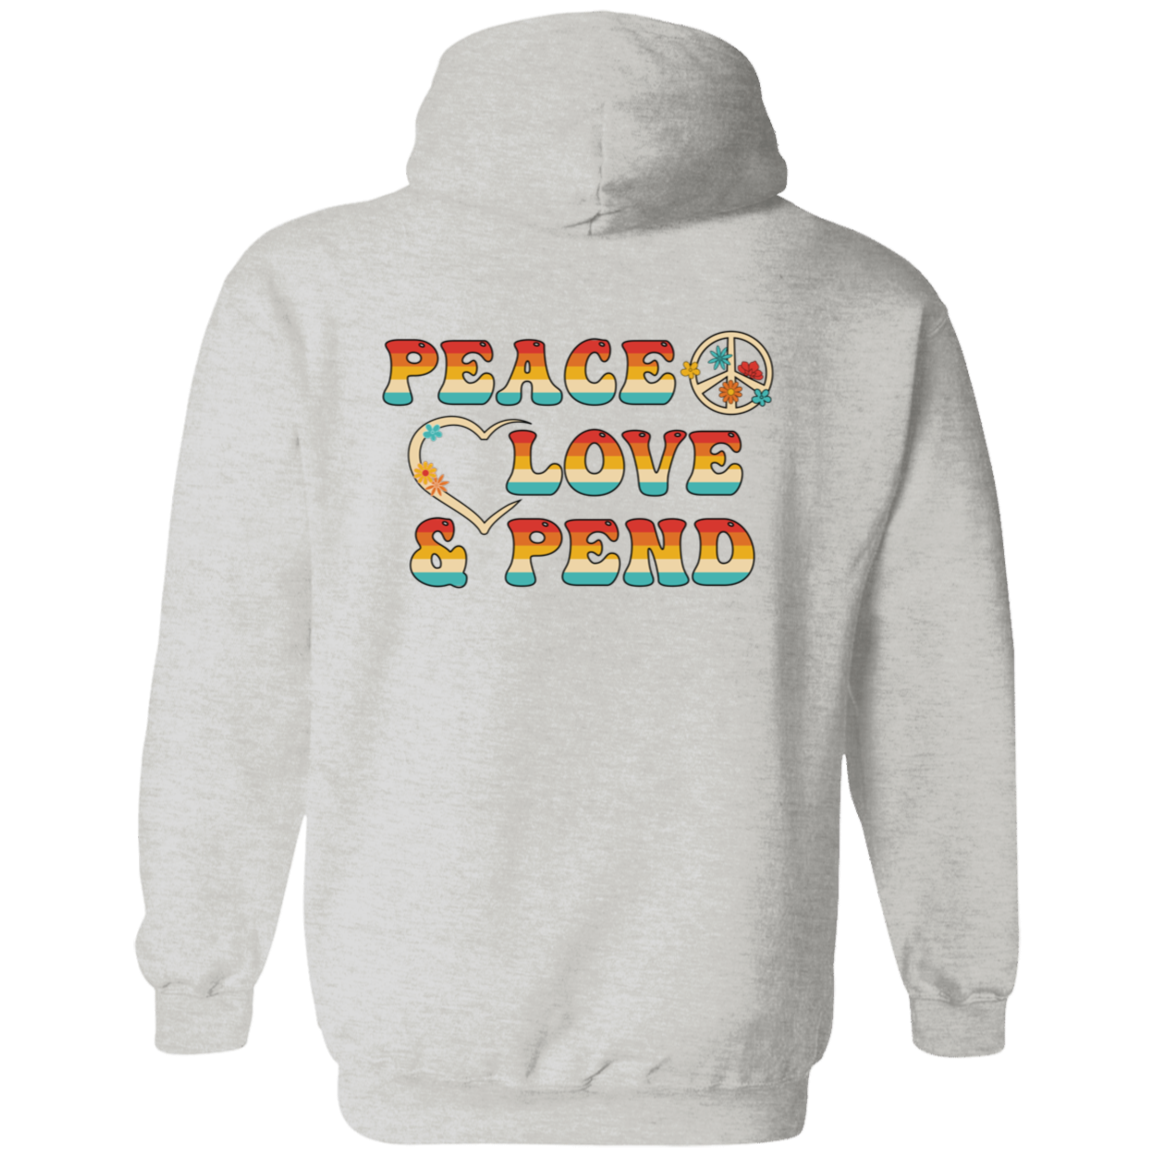 Peace, Love & Pend (Front & Back) - Hoodie